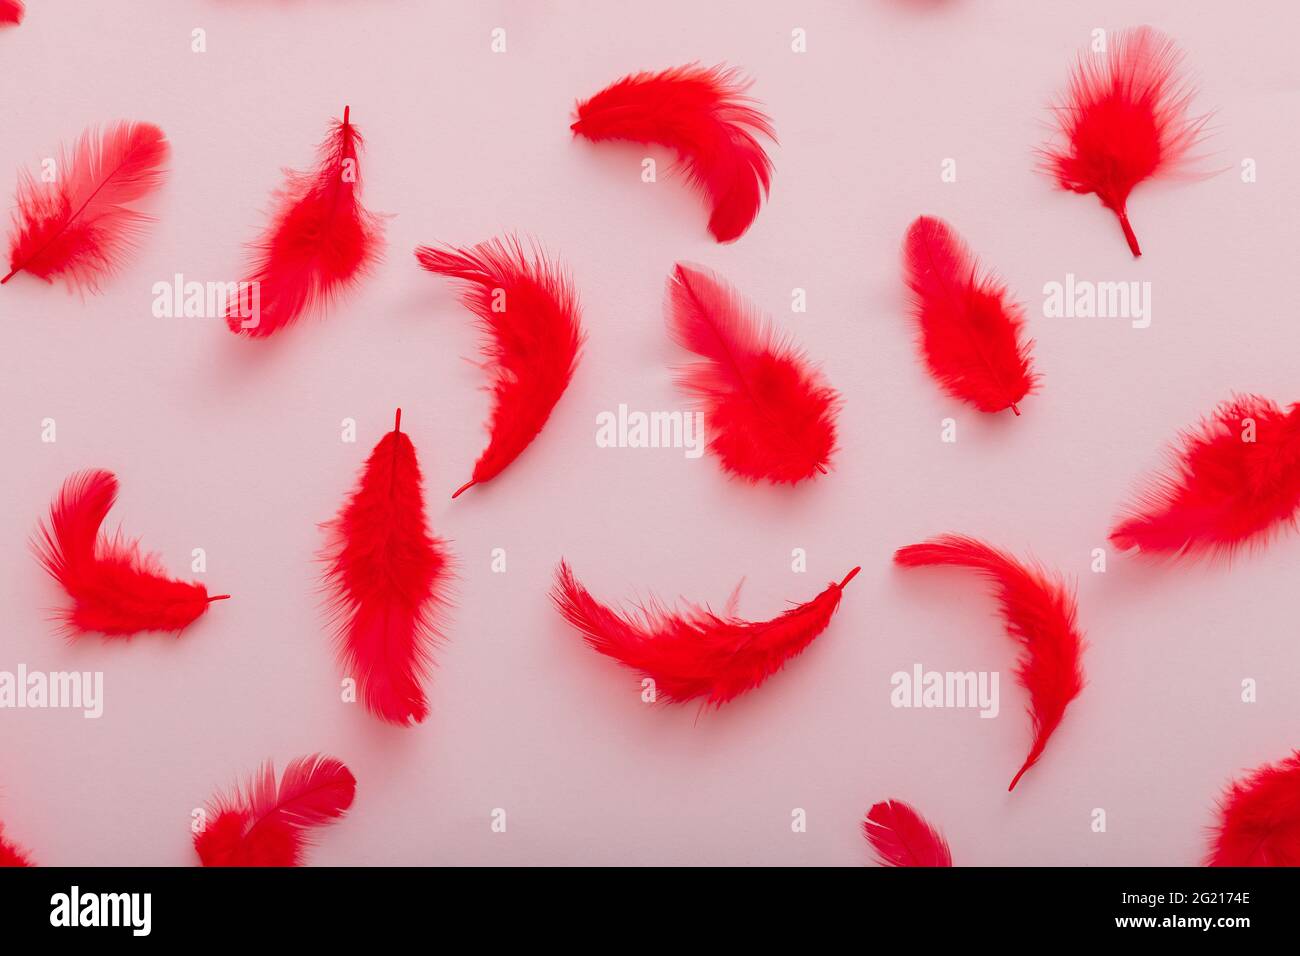 Red feathers pattern on pink colored background. Top view soft bird feather pattern texture. Stock Photo